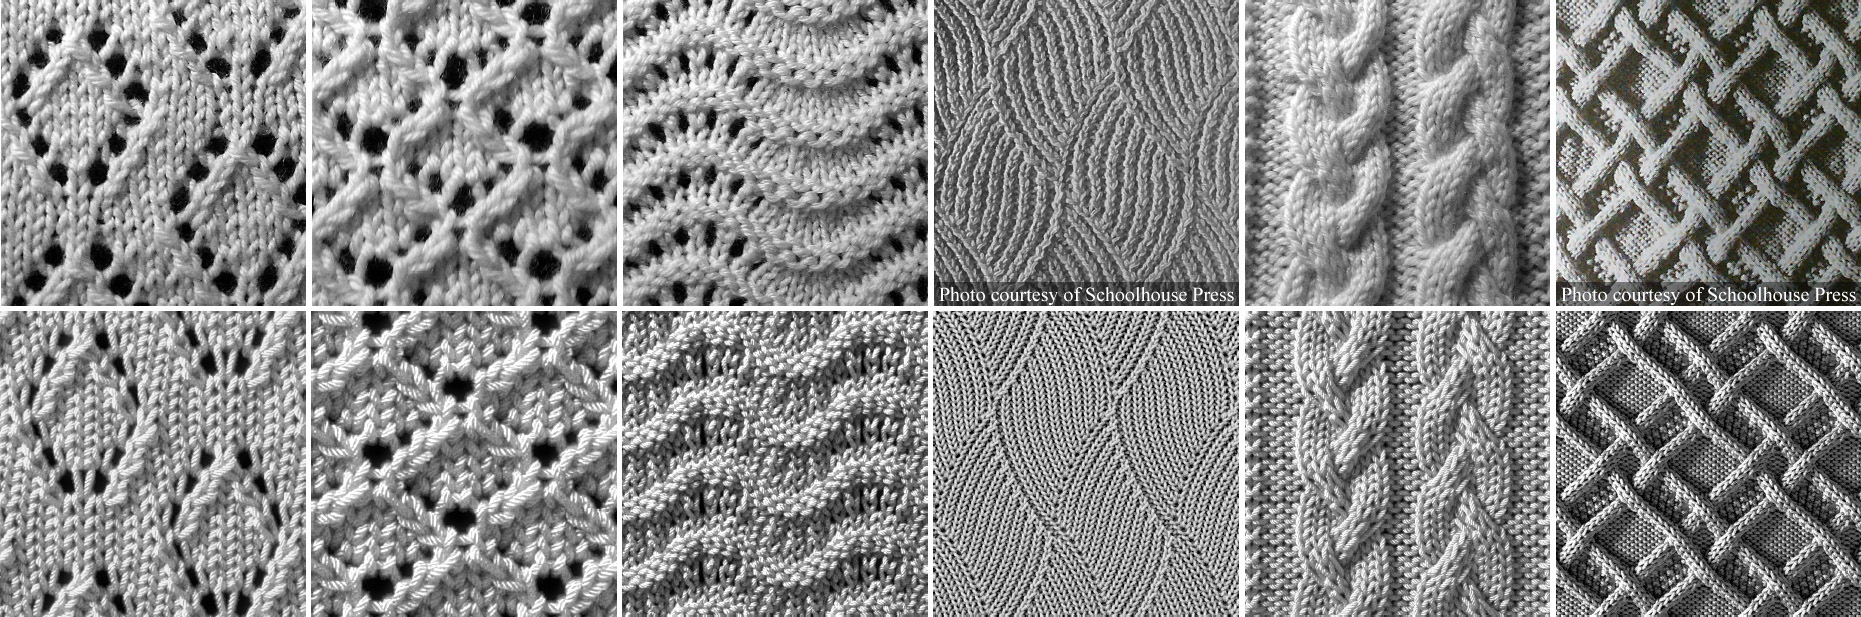 Pattern Knit Stitch Meshes For Modeling Knitted Clothing With Yarn Level Detail